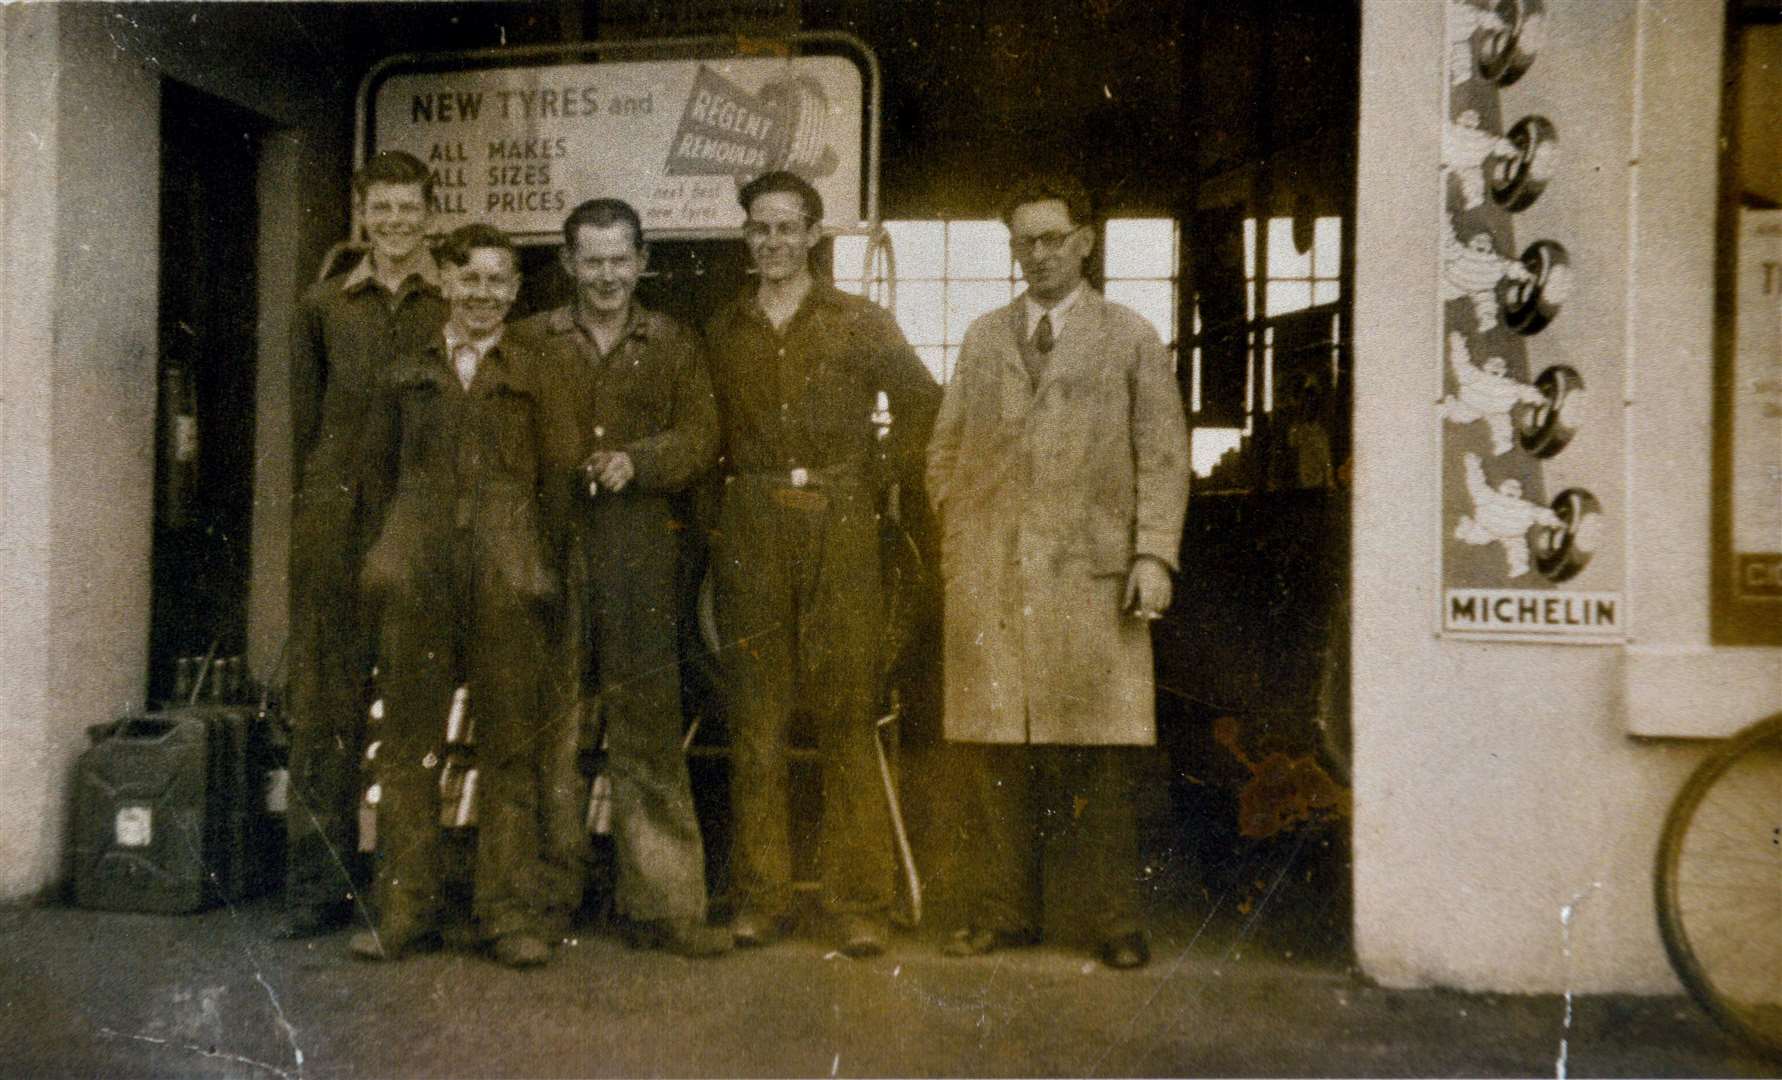 Norman Malcolm, extreme right, the previous garge owner with some members of staff including Willie McBean, Sinclair Sutherland, and William Milne.